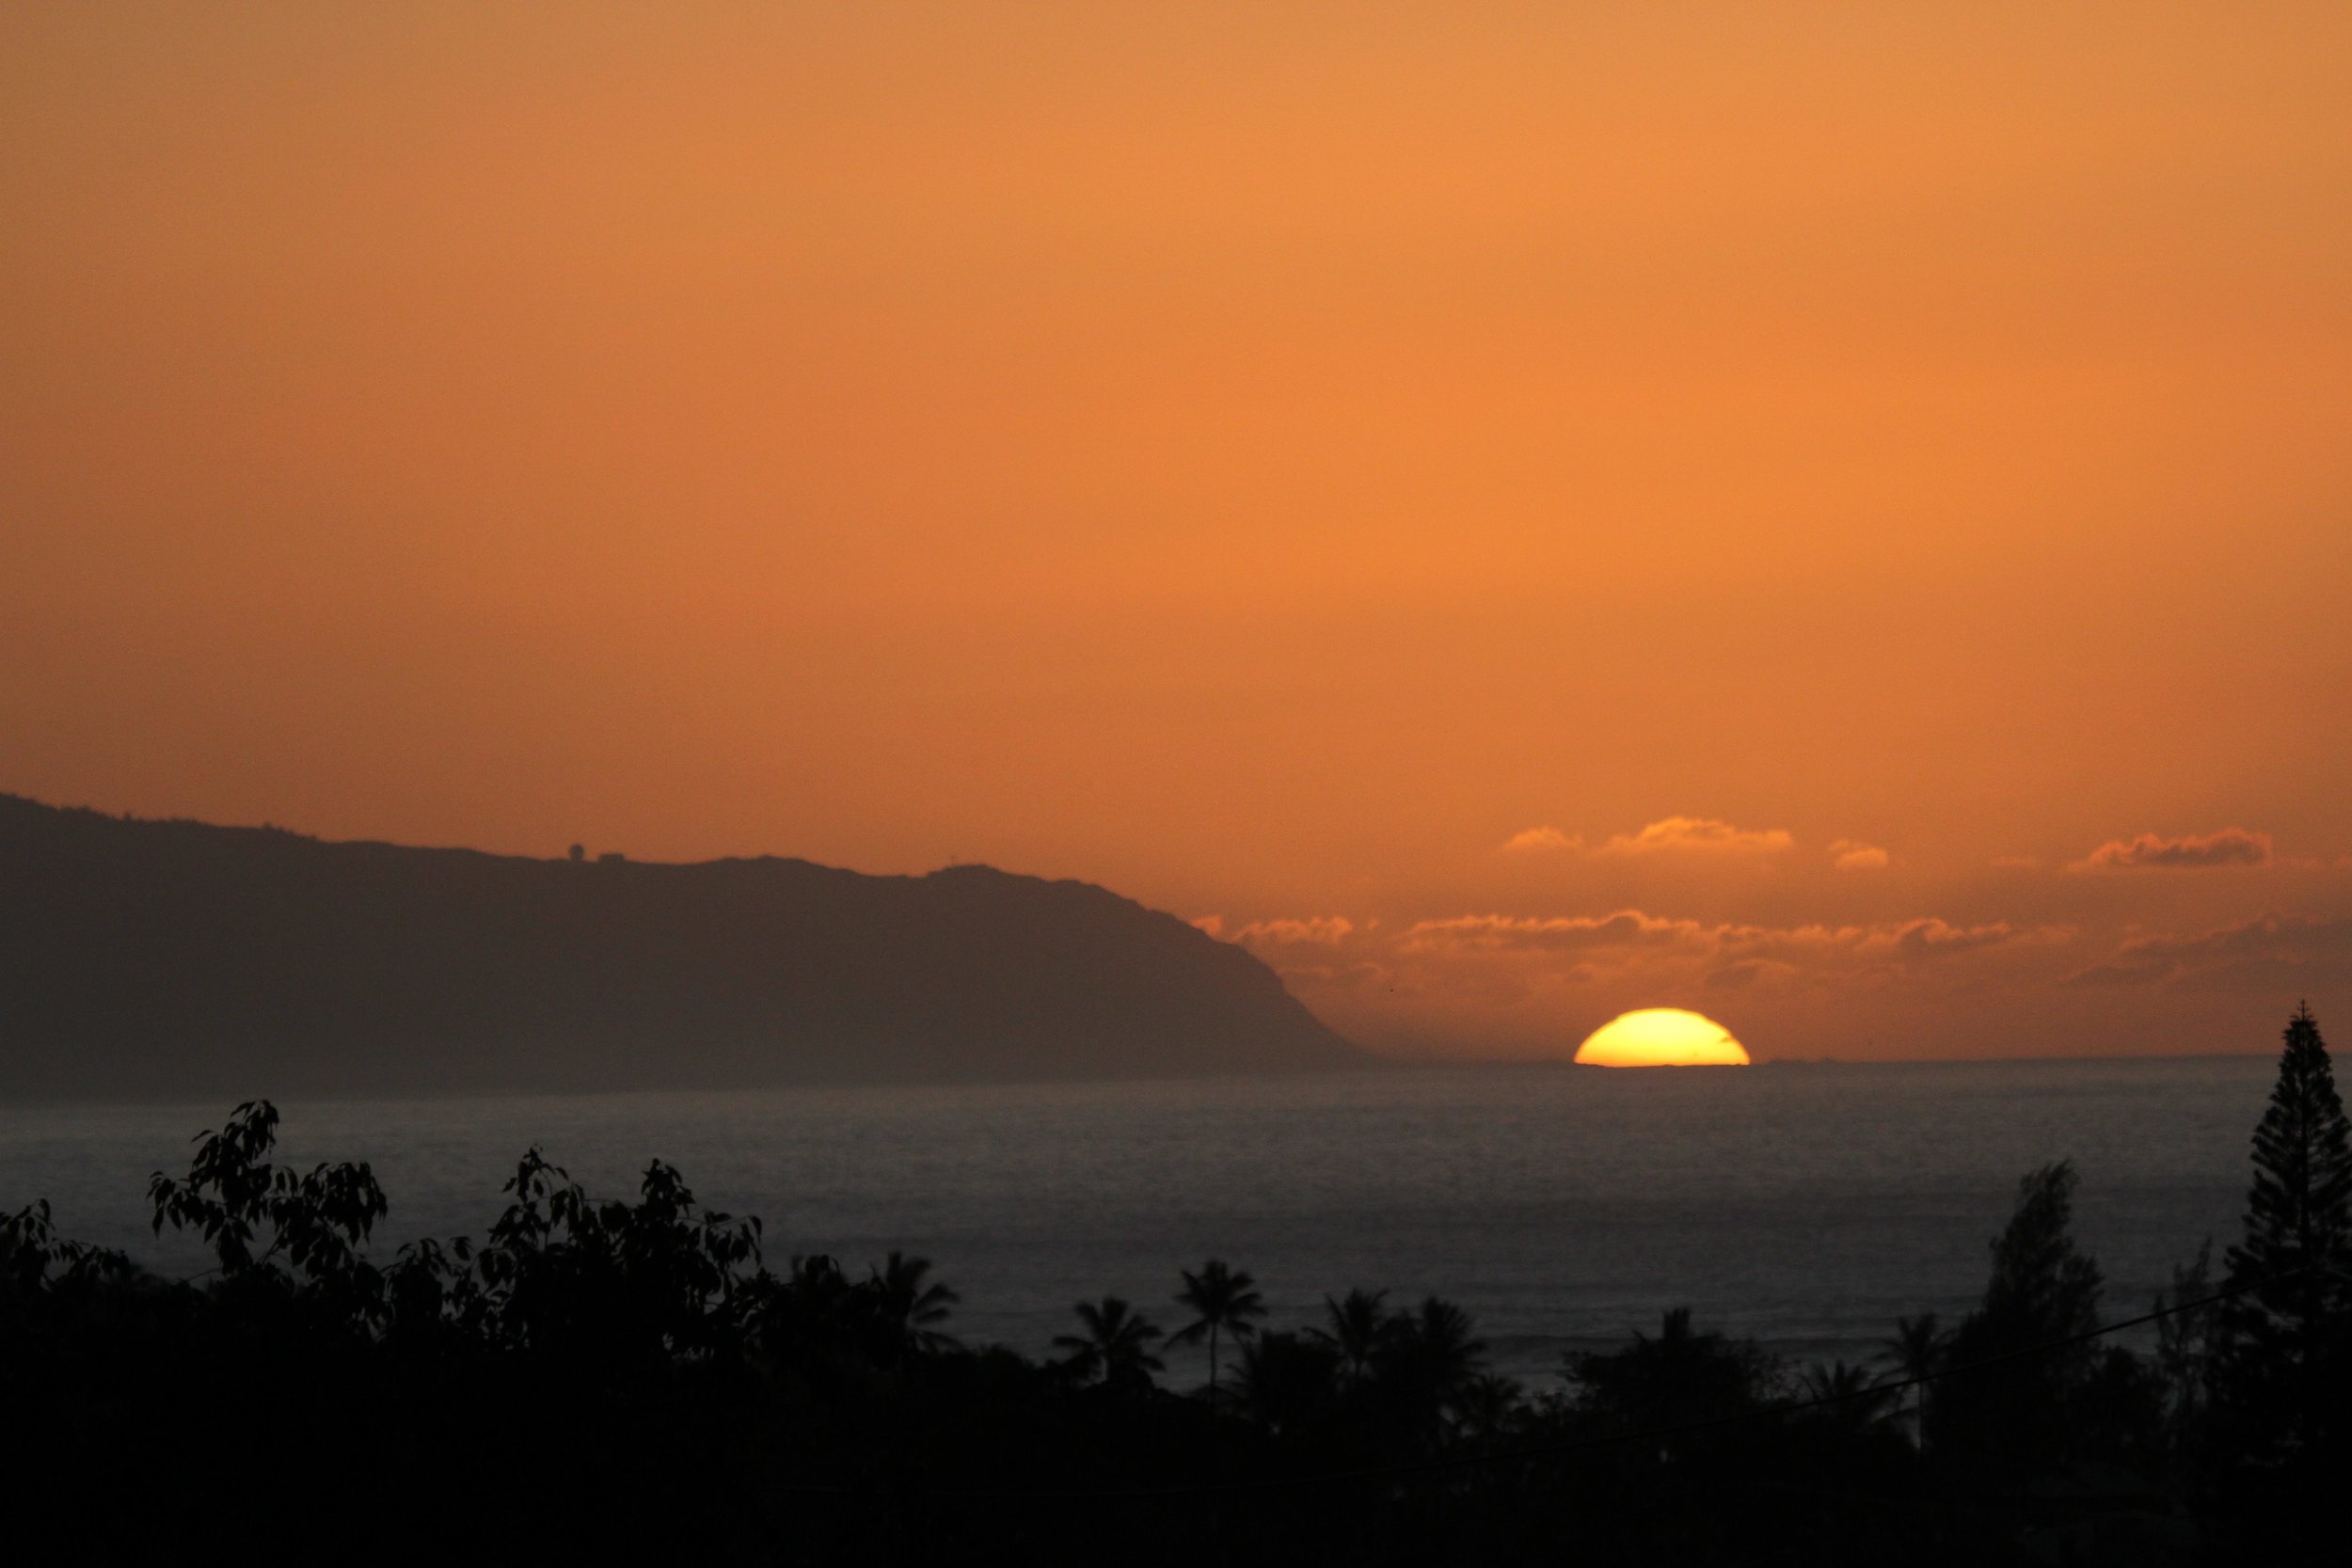 Maluhia view from Lanai of the Sunset over Kaena Point